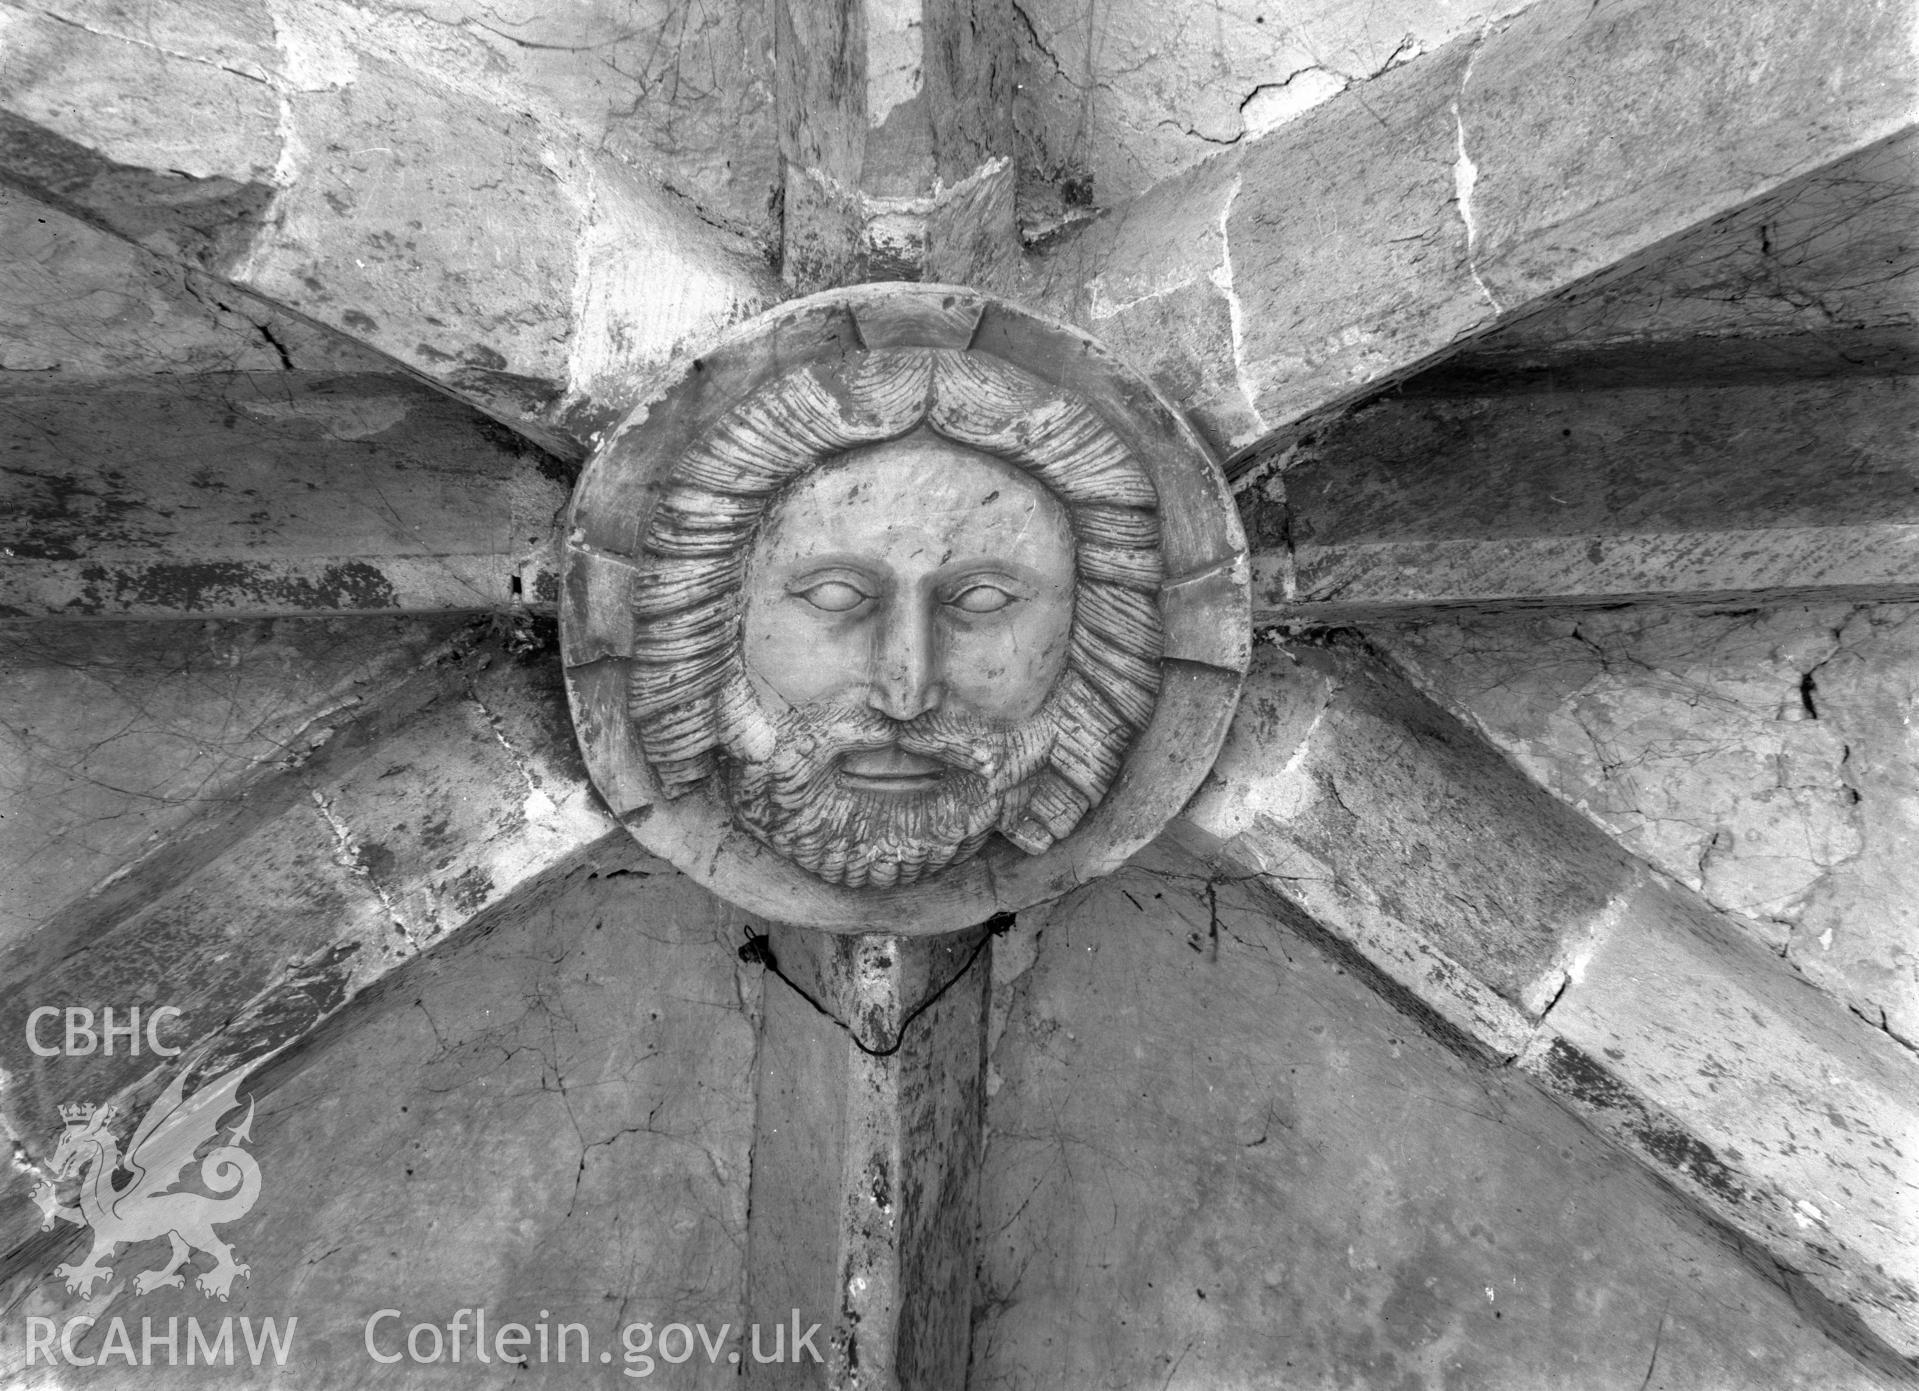 Digital copy of a black and white nitrate negative showing close-up view of boss at St. David's Cathedral, taken by E.W. Lovegrove, July 1936